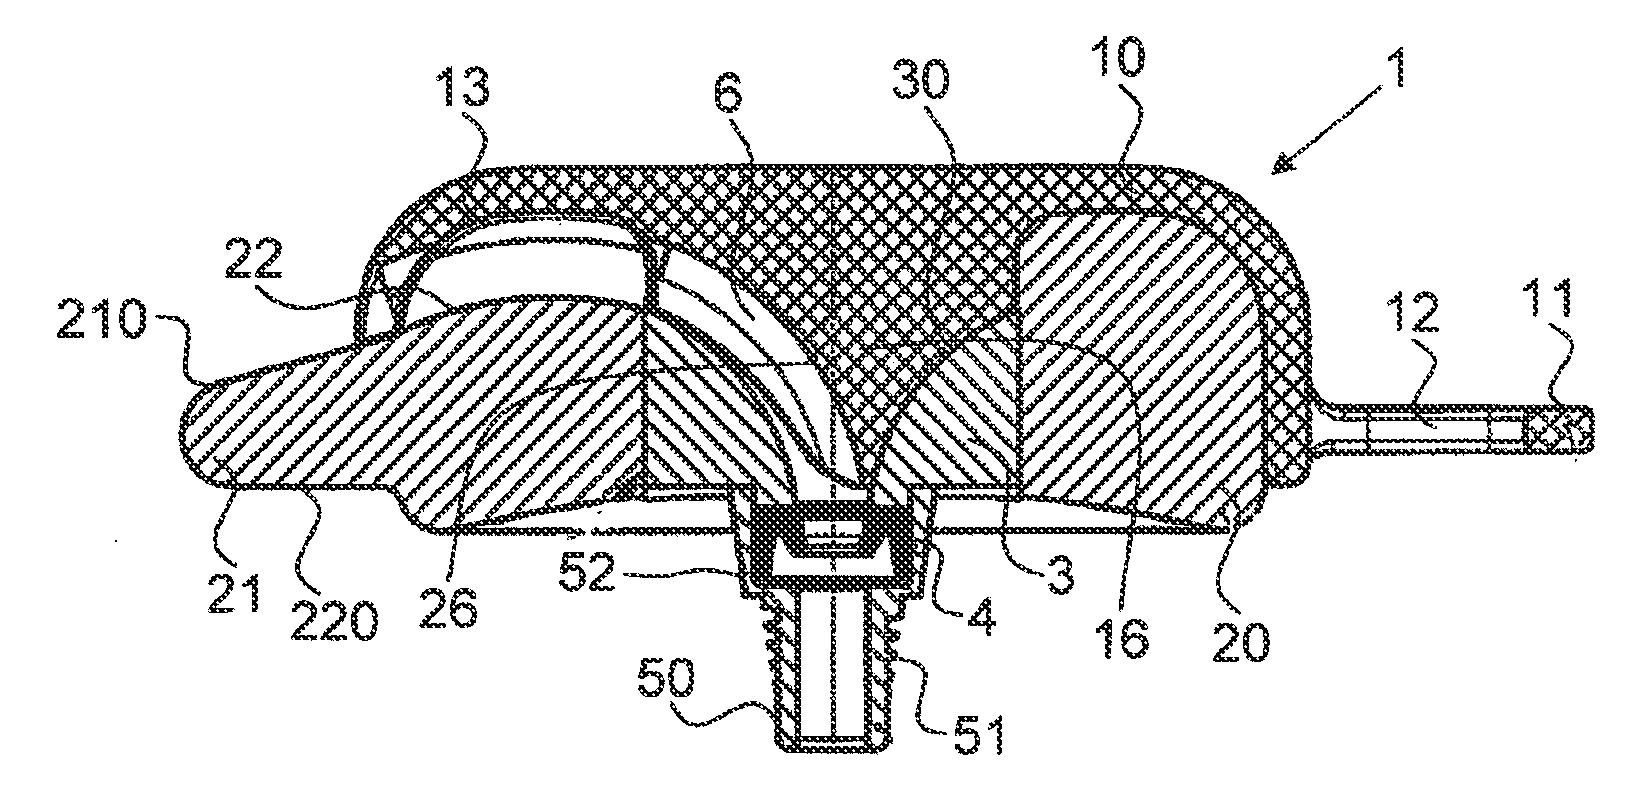 Anchoring device for a line in a skull bore hole